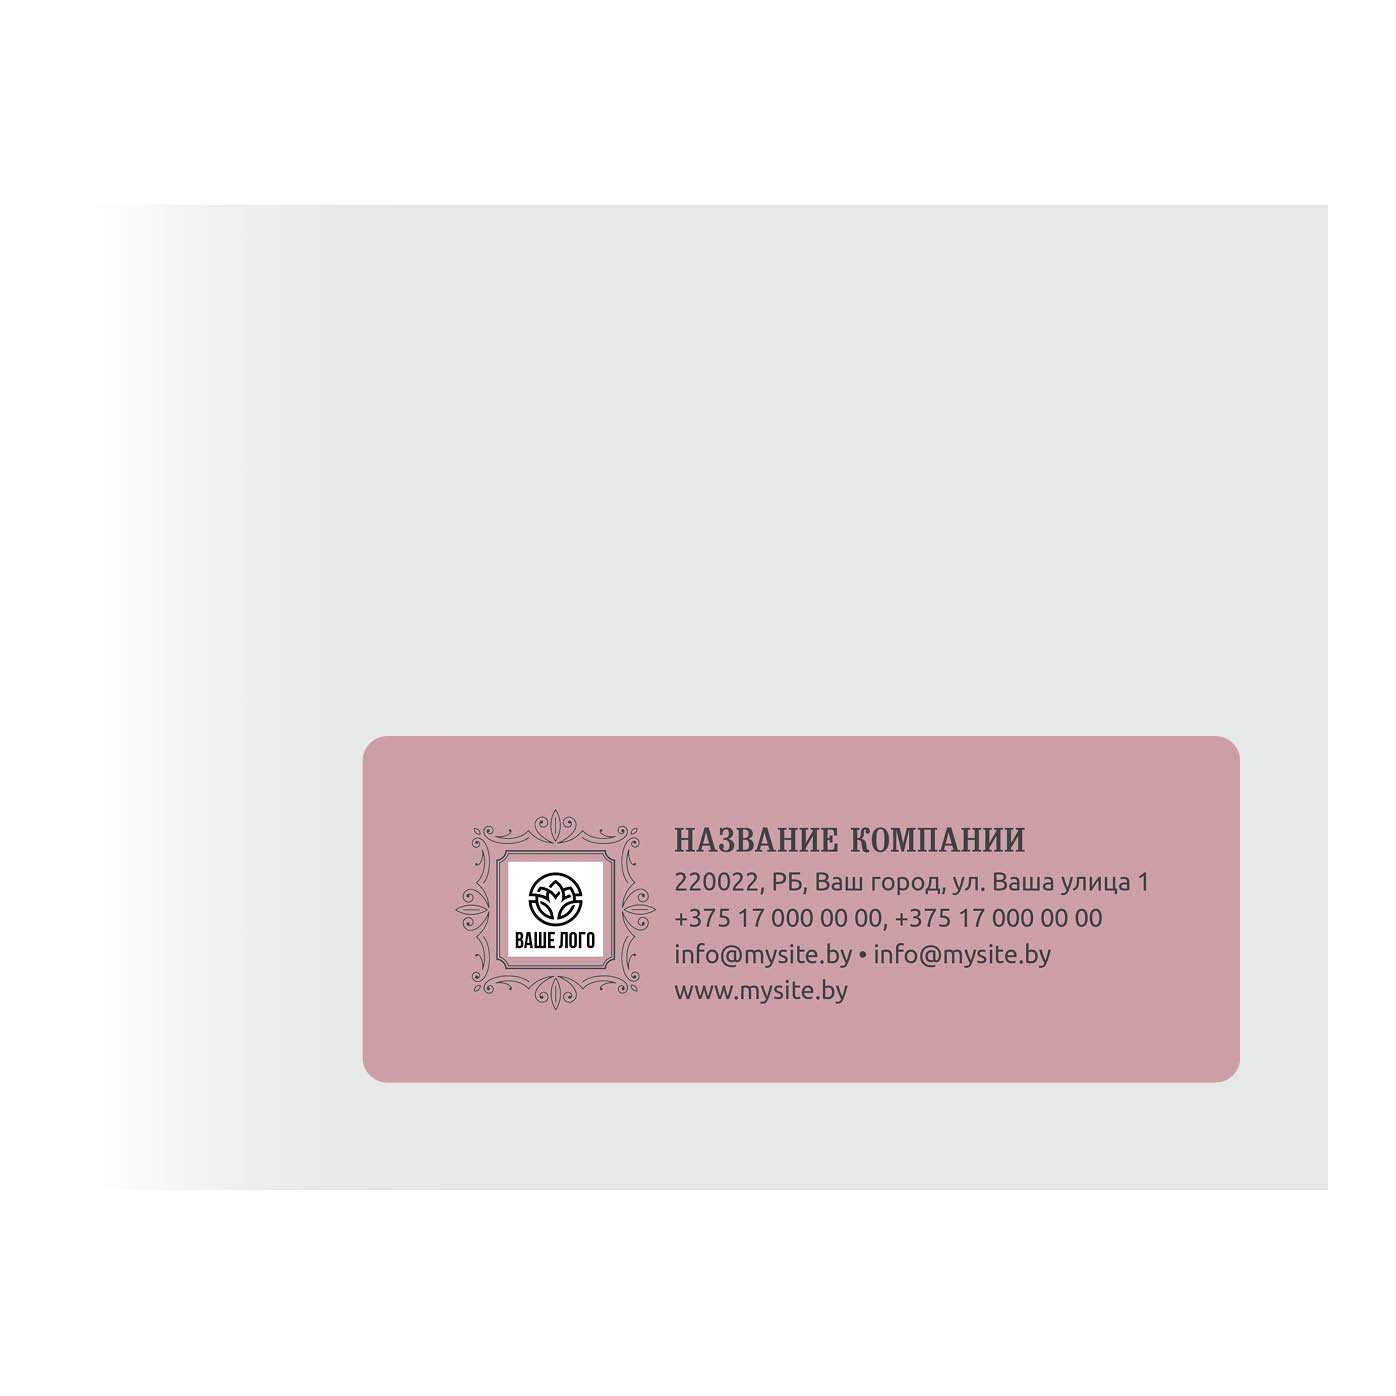 Stickers, labels on envelopes, address Pink background and grey text